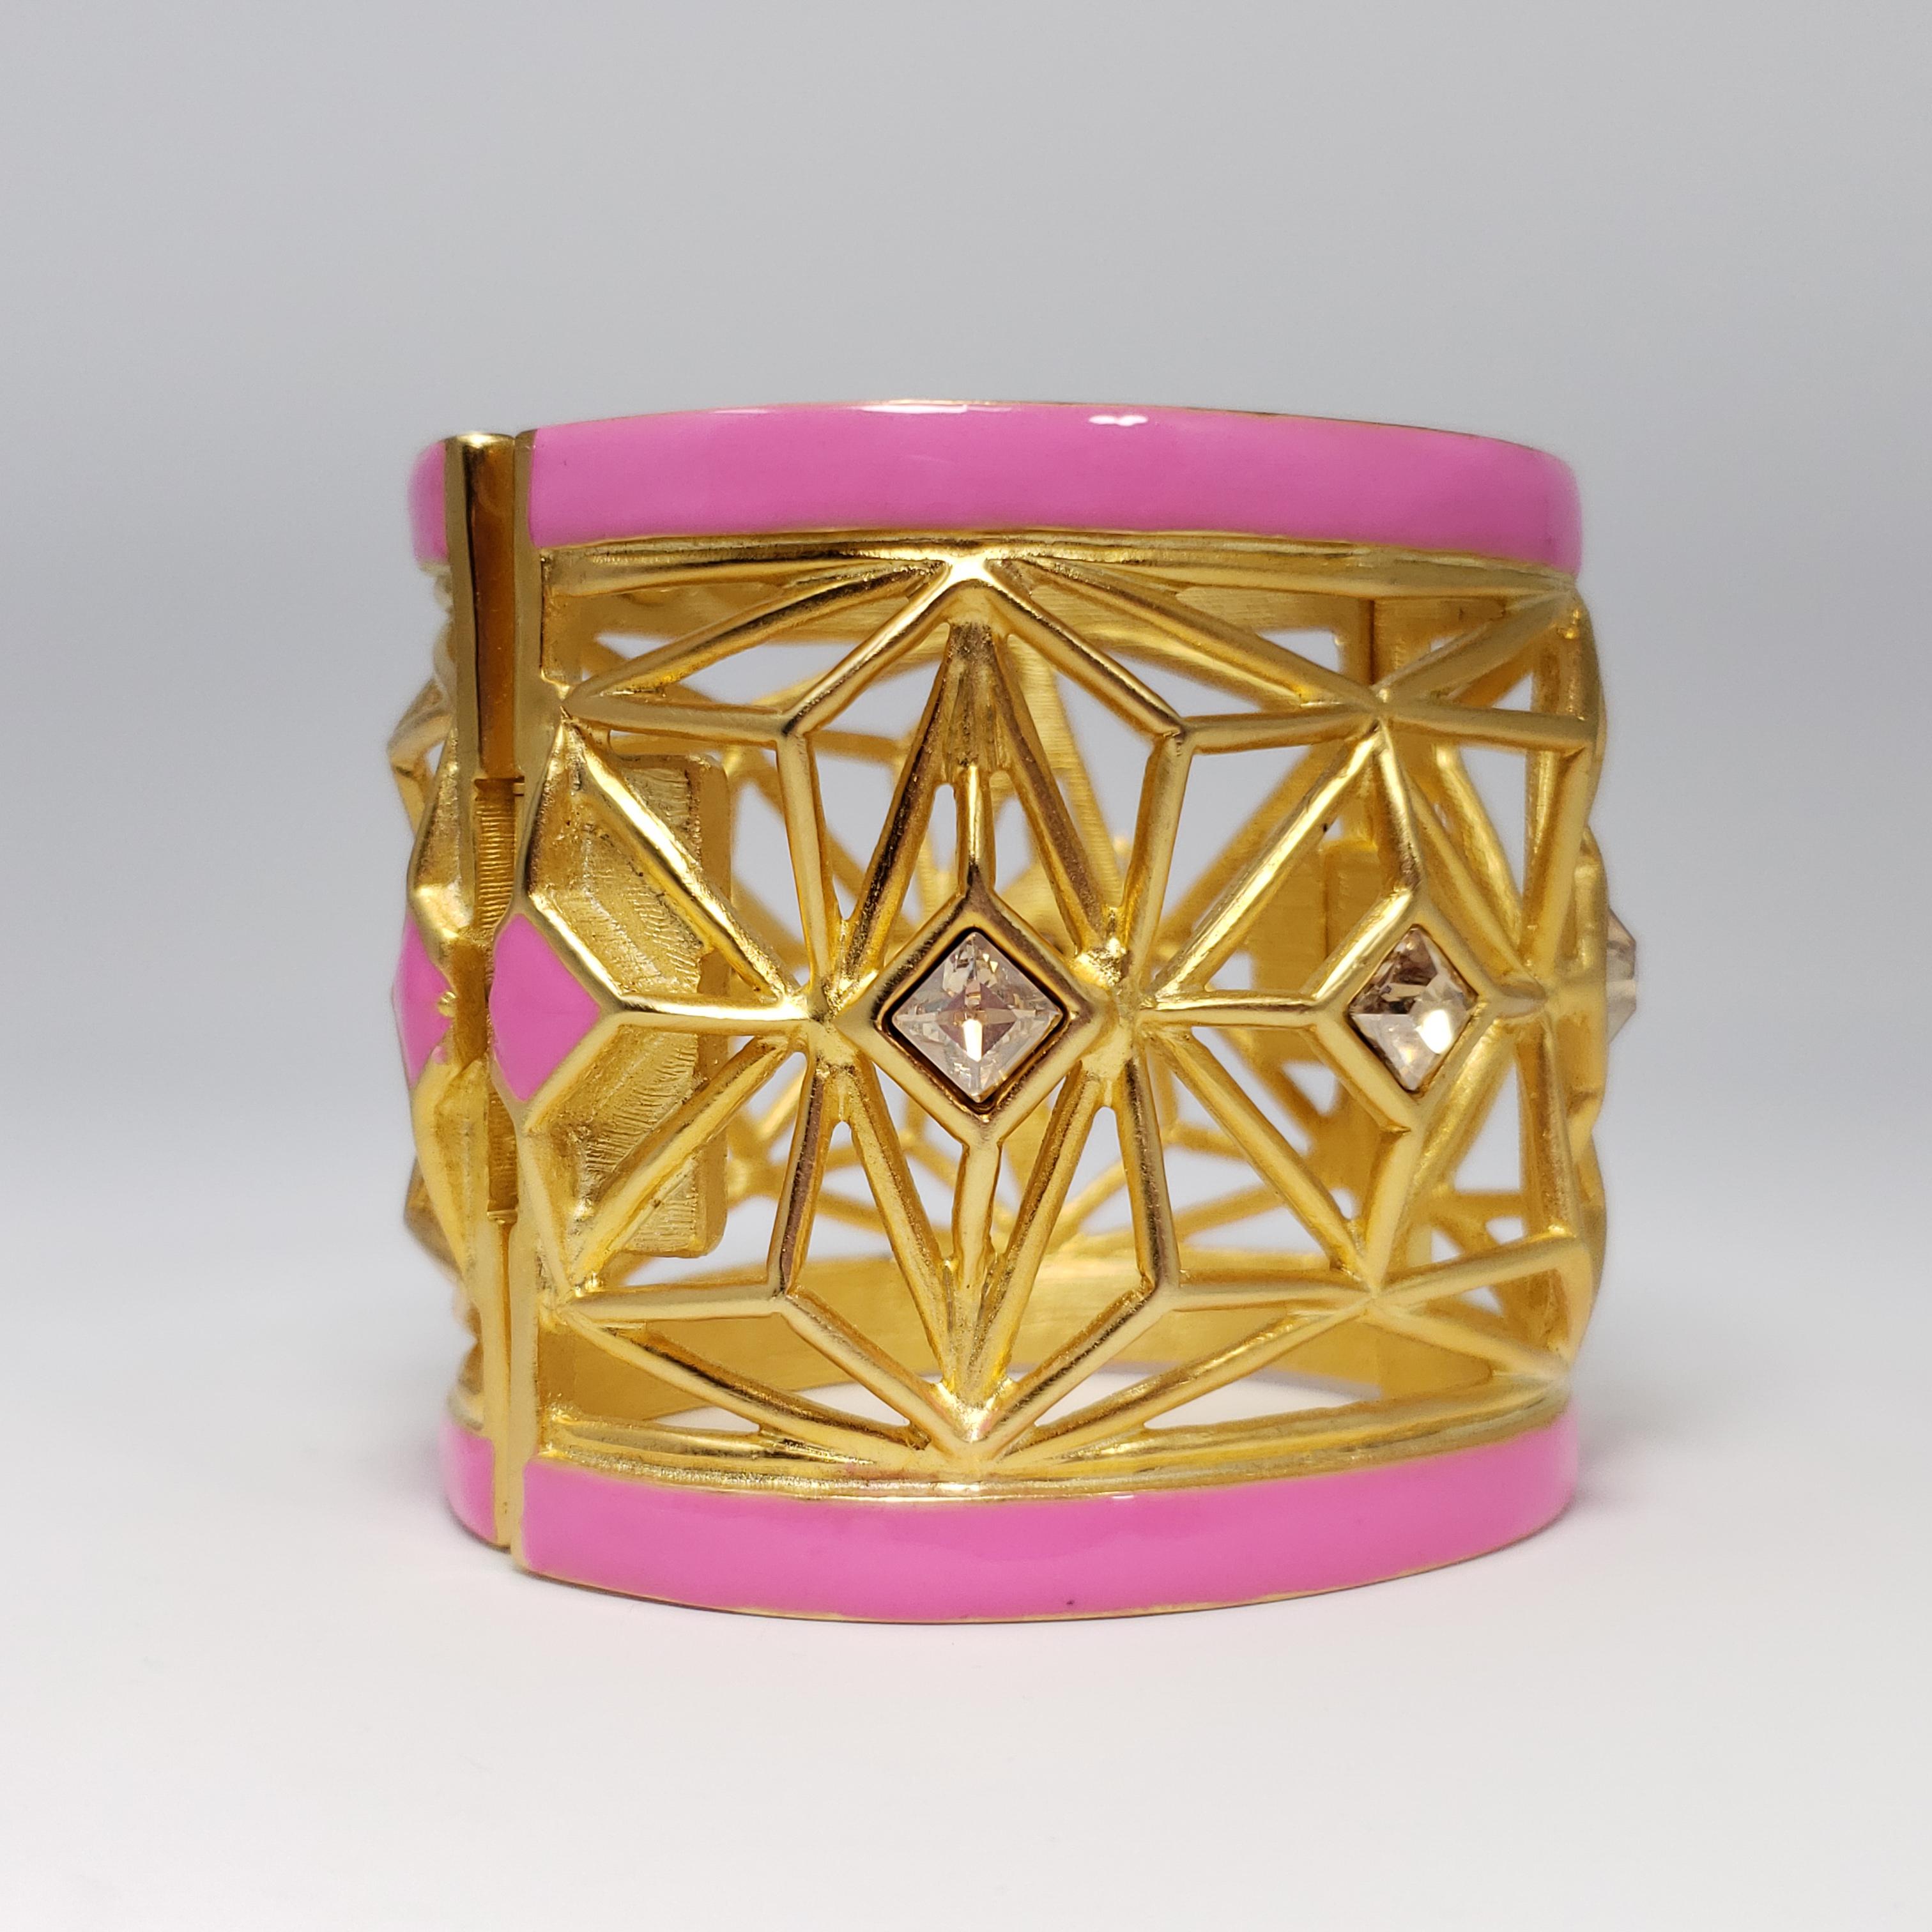 Kenneth Jay Lane KJL Geometric Chunky Gold Bangle Bracelet with Pink Accents In New Condition For Sale In Milford, DE